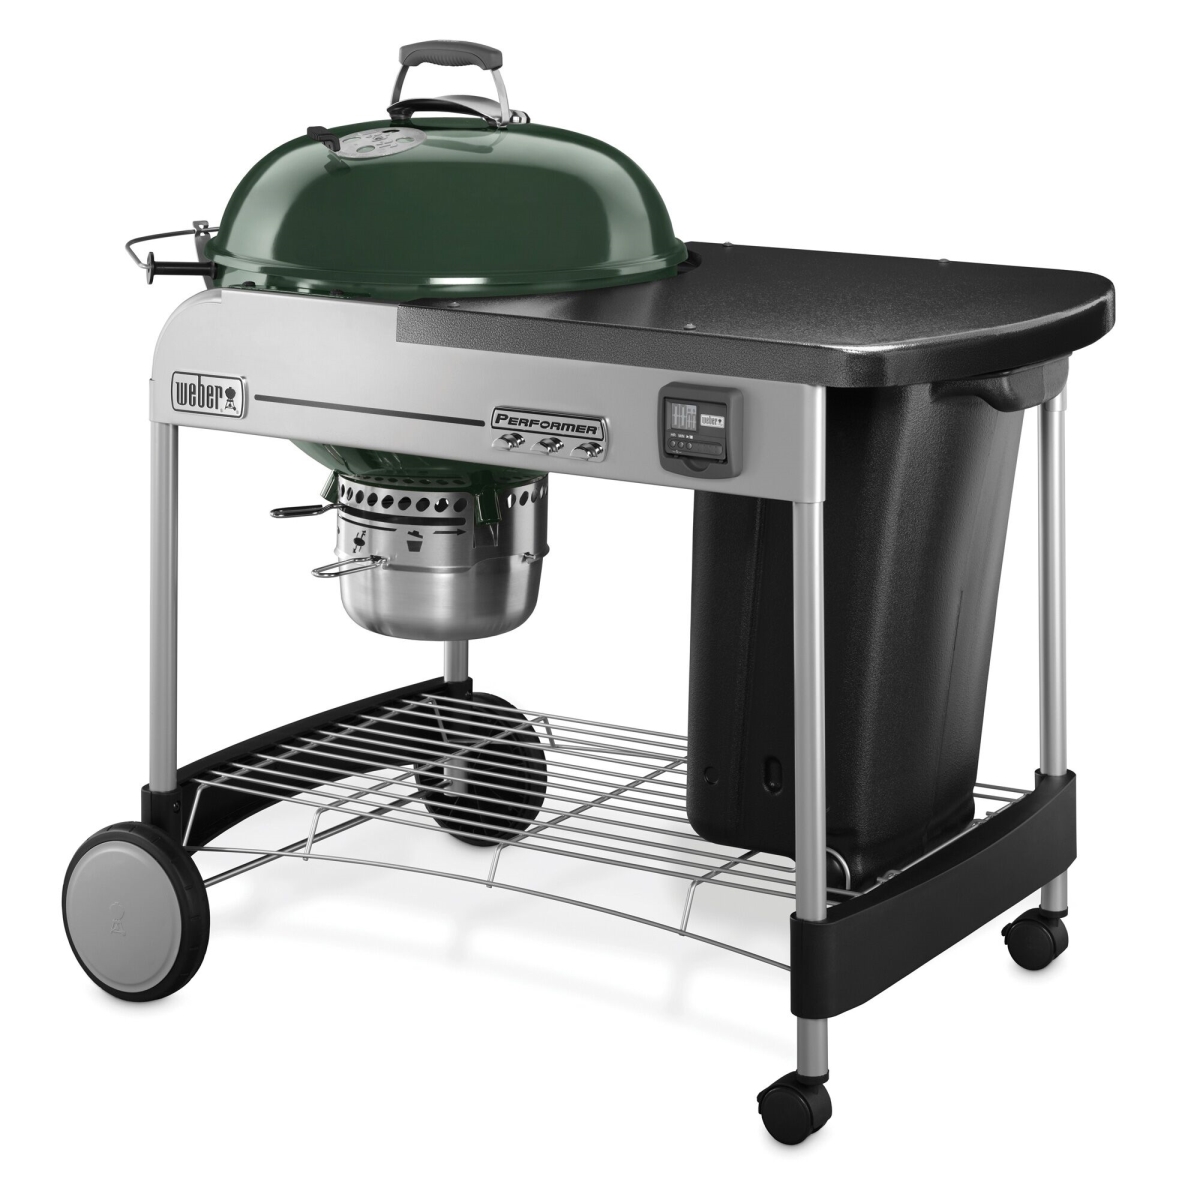 15407001 22 In. Performer Premium Charcoal Grill, Green